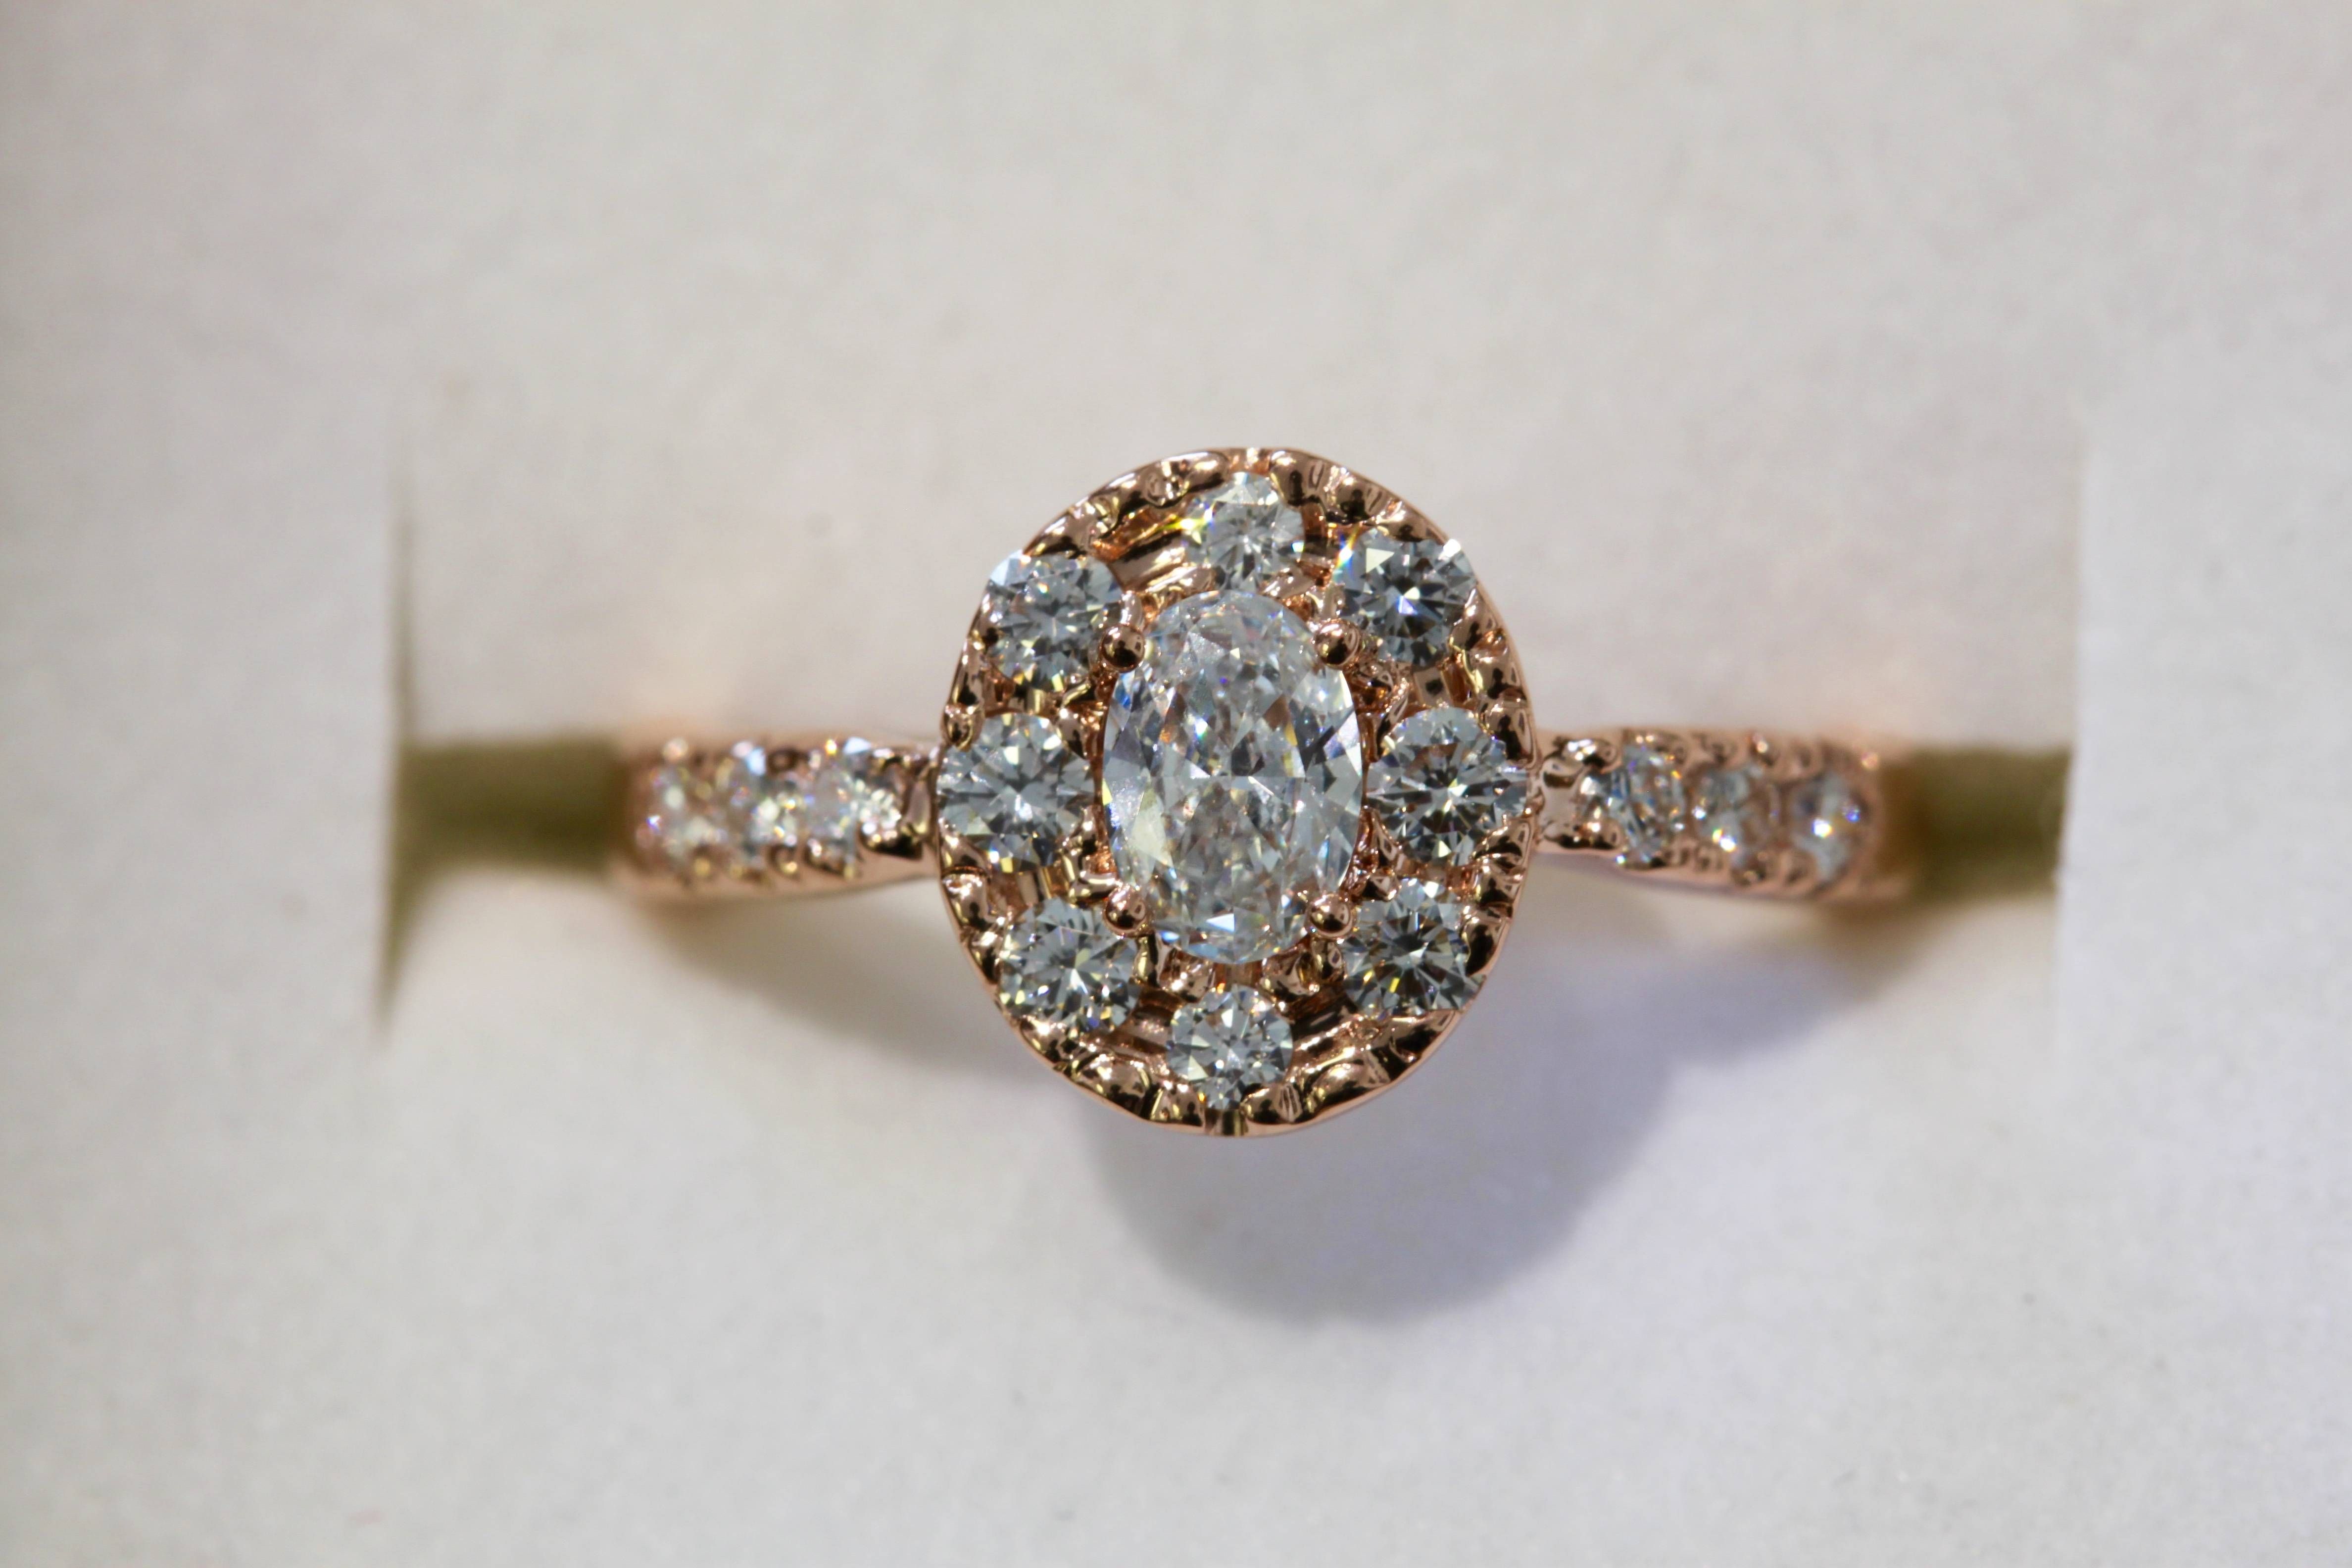 Hand Made Custom Engagement Rings | Custom Jewelry Gallery Pertaining To Hand Crafted Engagement Rings (View 6 of 15)